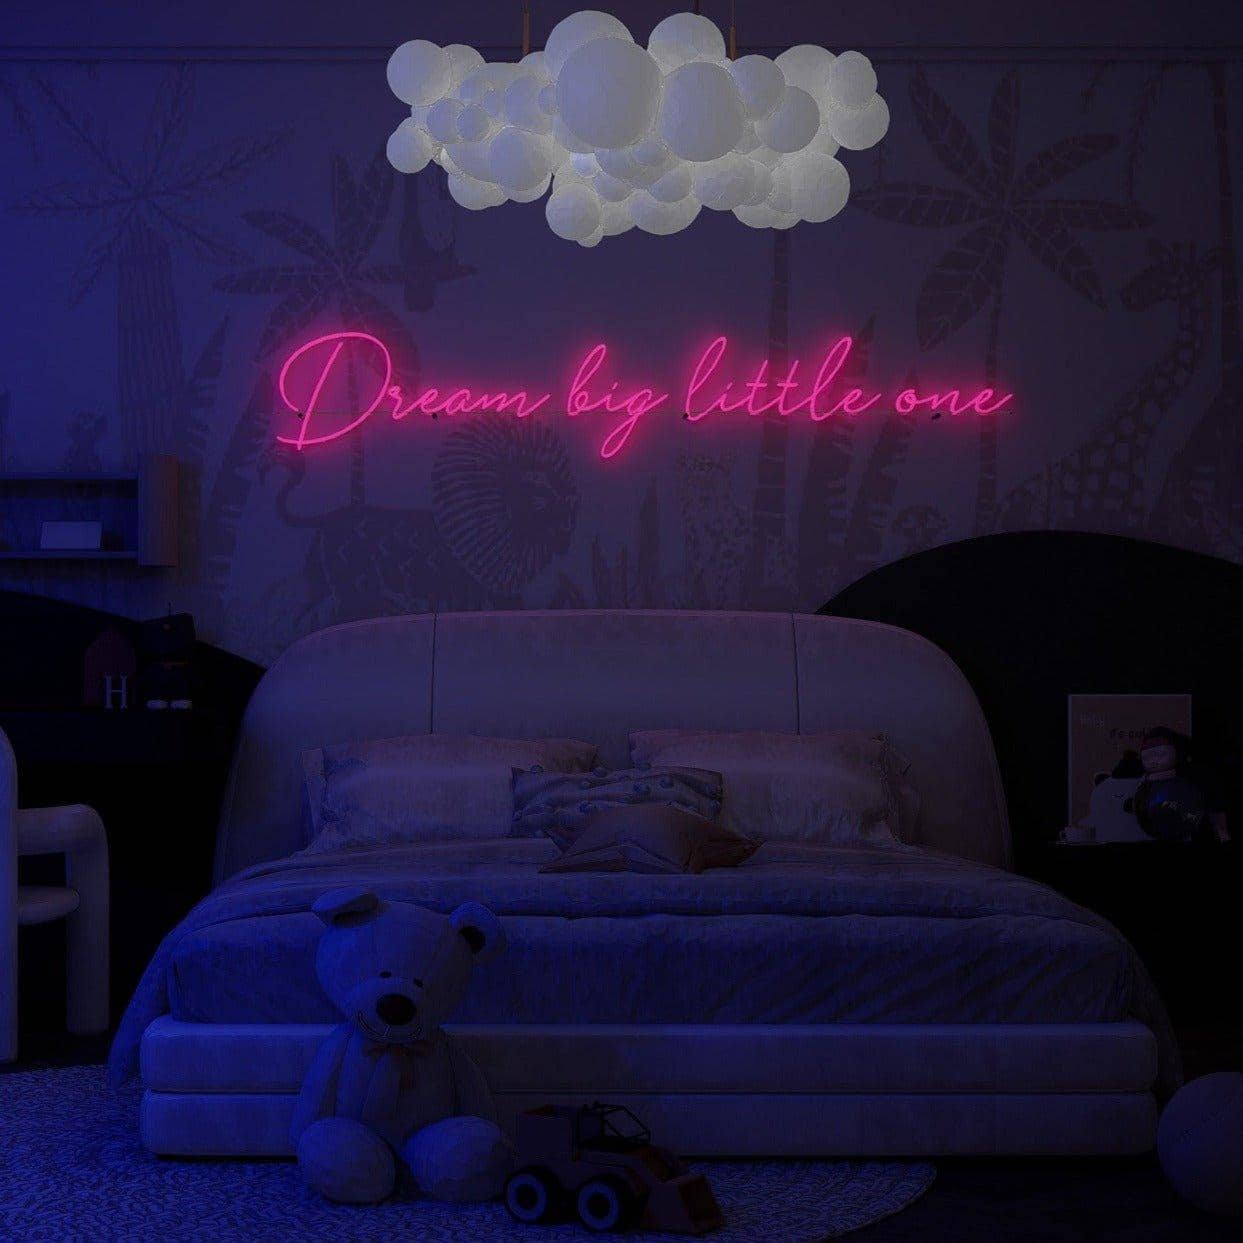 dimensional-picture-of-pink-neon-lights-lit-up-in-the-dark-for-display-in-the-bedroom-dream-big-little-one